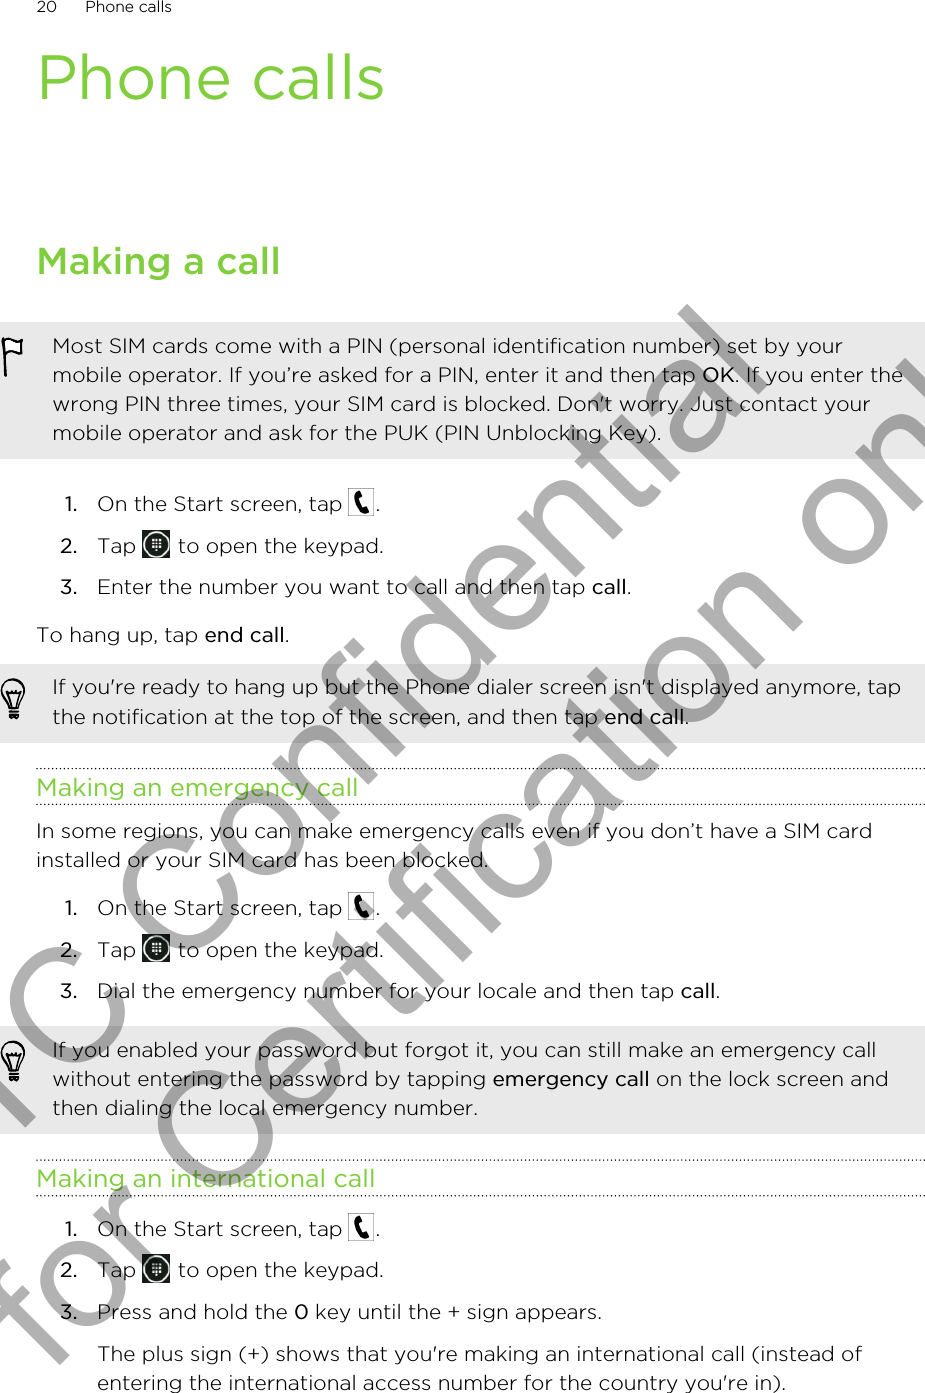 Phone callsMaking a callMost SIM cards come with a PIN (personal identification number) set by yourmobile operator. If you’re asked for a PIN, enter it and then tap OK. If you enter thewrong PIN three times, your SIM card is blocked. Don&apos;t worry. Just contact yourmobile operator and ask for the PUK (PIN Unblocking Key).1. On the Start screen, tap  .2. Tap   to open the keypad.3. Enter the number you want to call and then tap call.To hang up, tap end call.If you&apos;re ready to hang up but the Phone dialer screen isn&apos;t displayed anymore, tapthe notification at the top of the screen, and then tap end call.Making an emergency callIn some regions, you can make emergency calls even if you don’t have a SIM cardinstalled or your SIM card has been blocked.1. On the Start screen, tap  .2. Tap   to open the keypad.3. Dial the emergency number for your locale and then tap call.If you enabled your password but forgot it, you can still make an emergency callwithout entering the password by tapping emergency call on the lock screen andthen dialing the local emergency number.Making an international call1. On the Start screen, tap  .2. Tap   to open the keypad.3. Press and hold the 0 key until the + sign appears. The plus sign (+) shows that you&apos;re making an international call (instead ofentering the international access number for the country you&apos;re in).20 Phone callsHTC Confidential for Certification only